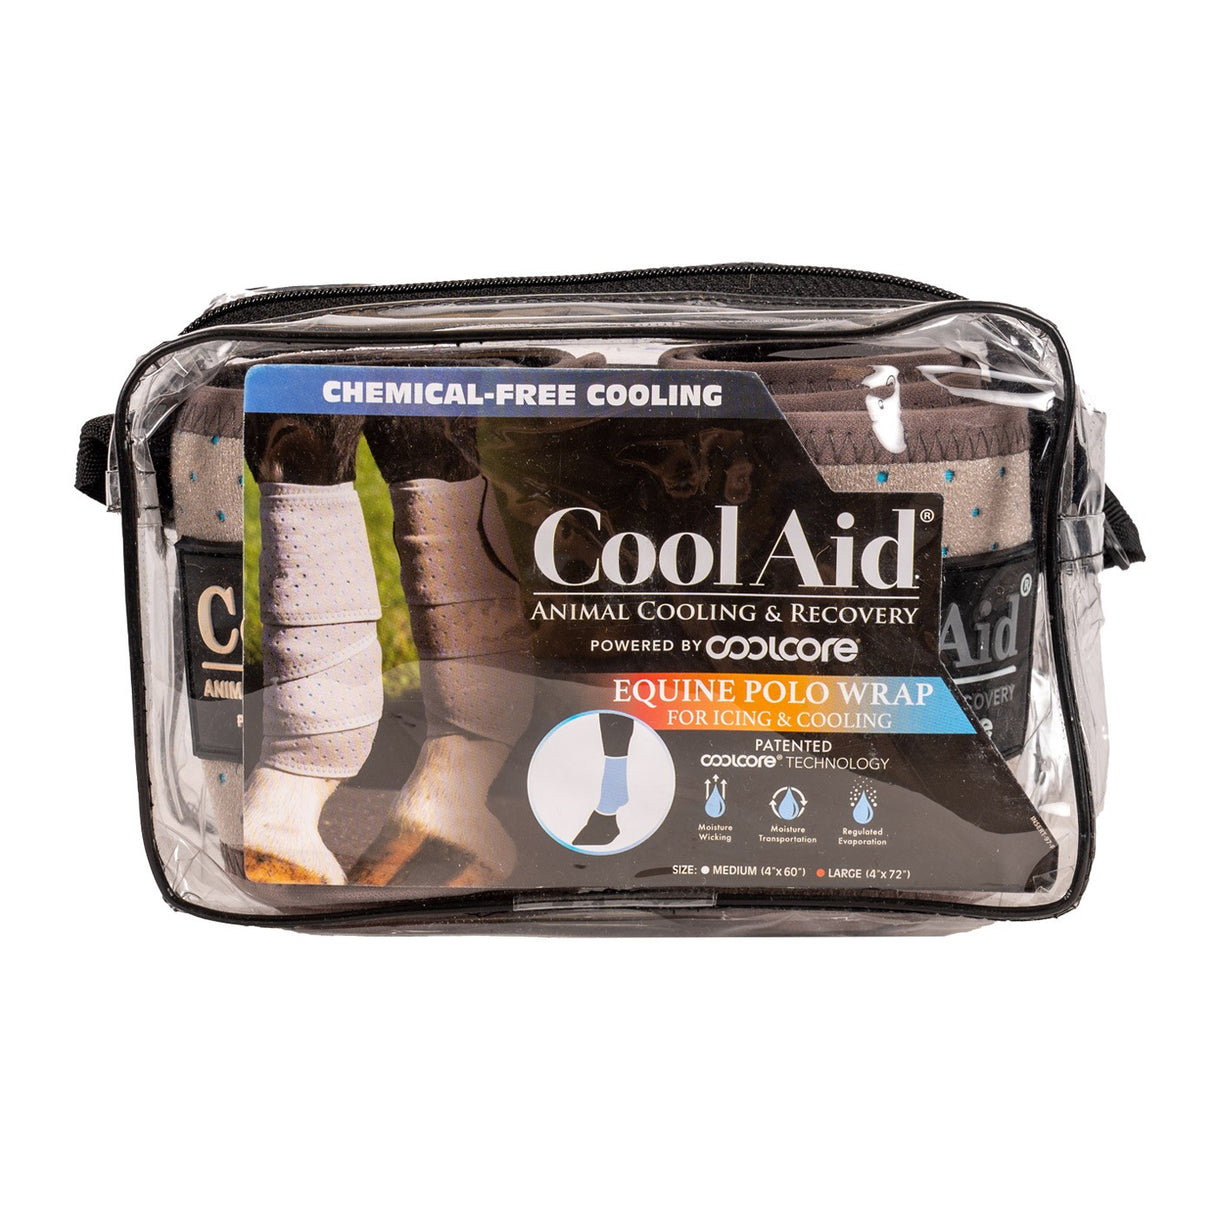 Weaver CoolAid Equine Icing & Cooling Polo Wraps